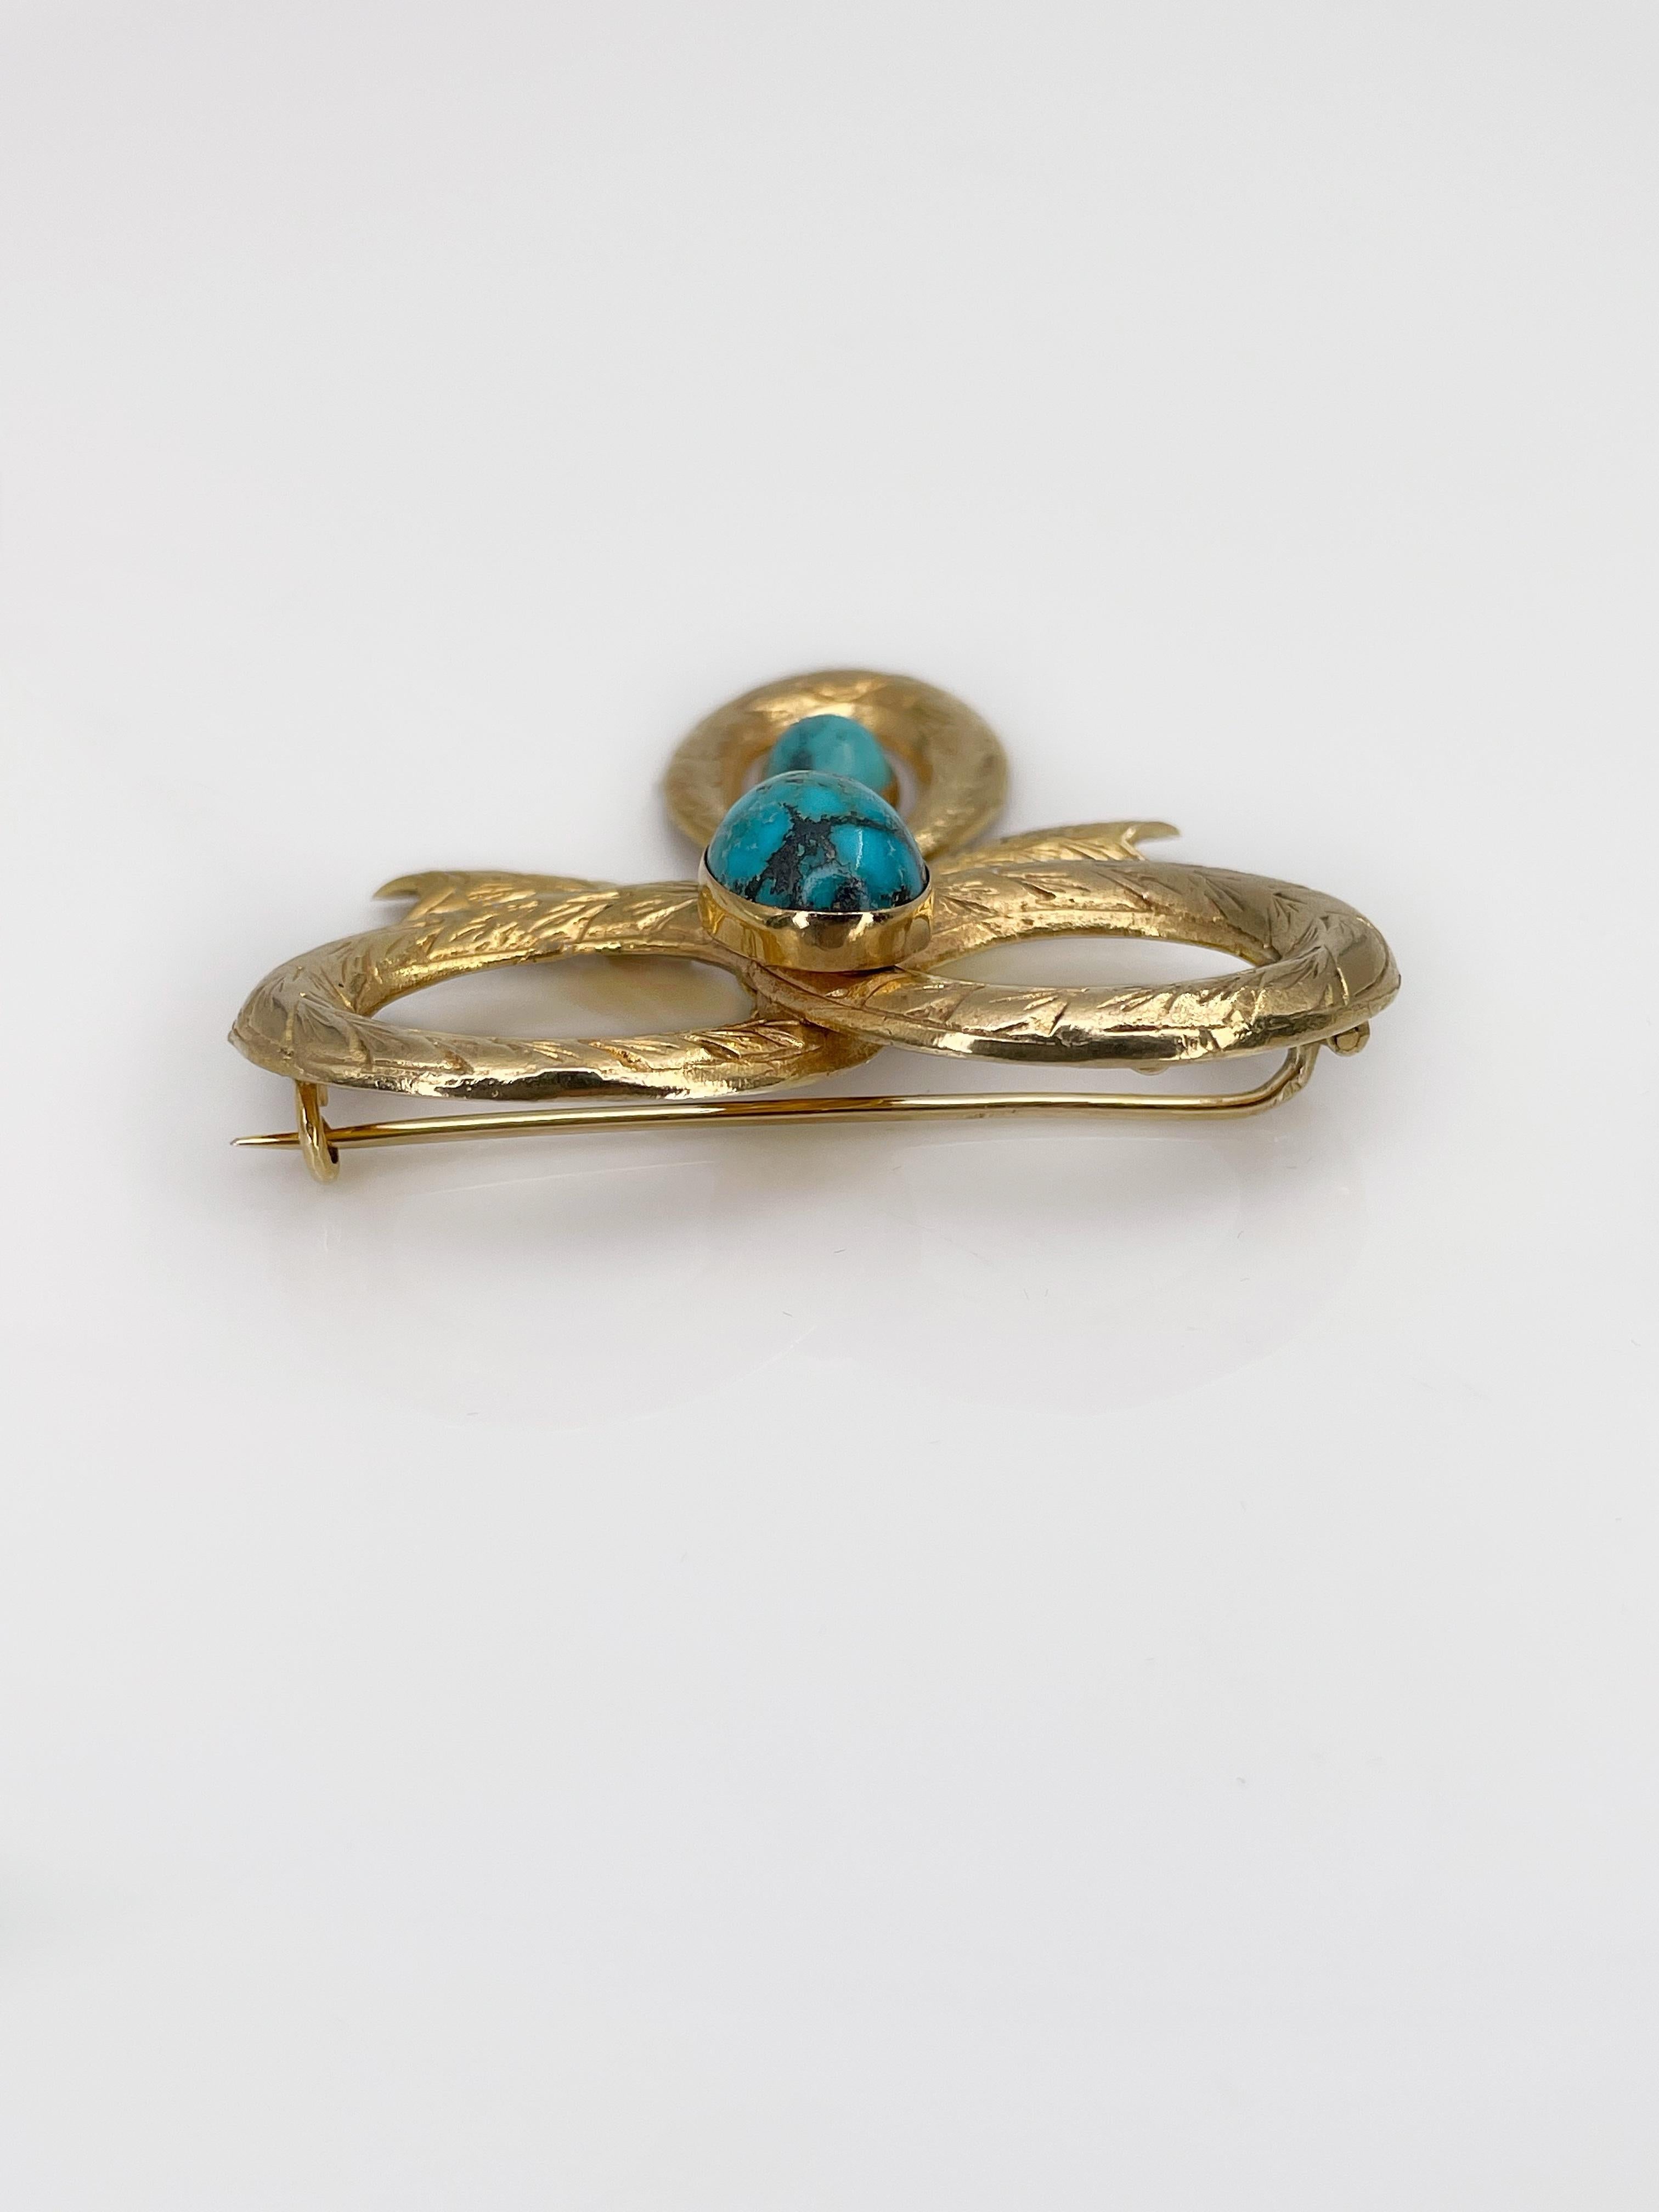 Women's or Men's Antique Victorian 9ct Yellow Gold Cabochon Turquoise Bow Brooch